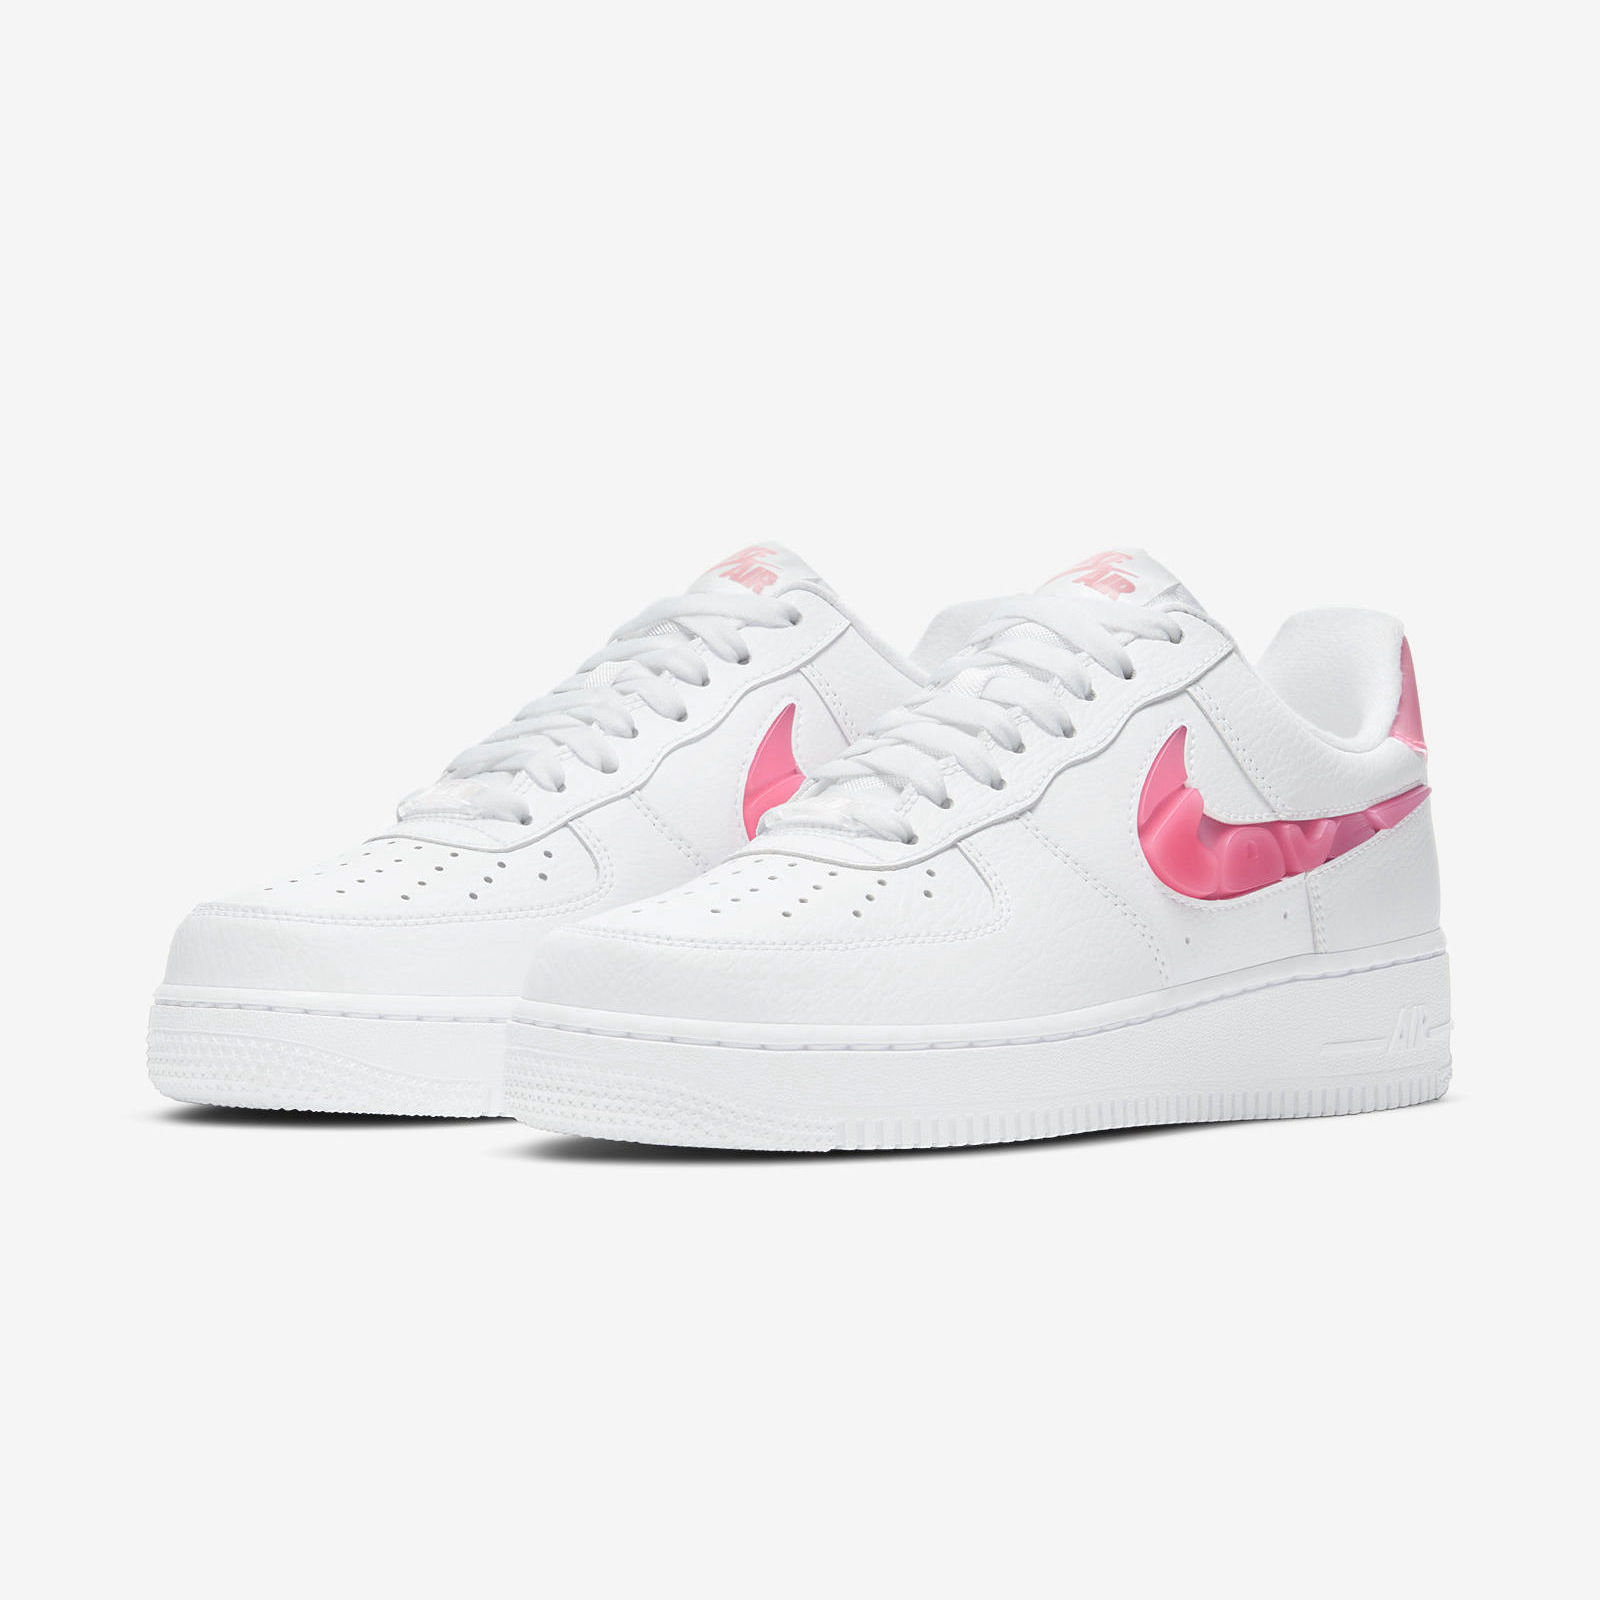 Nike Air Force 1 SE
« Love For All »